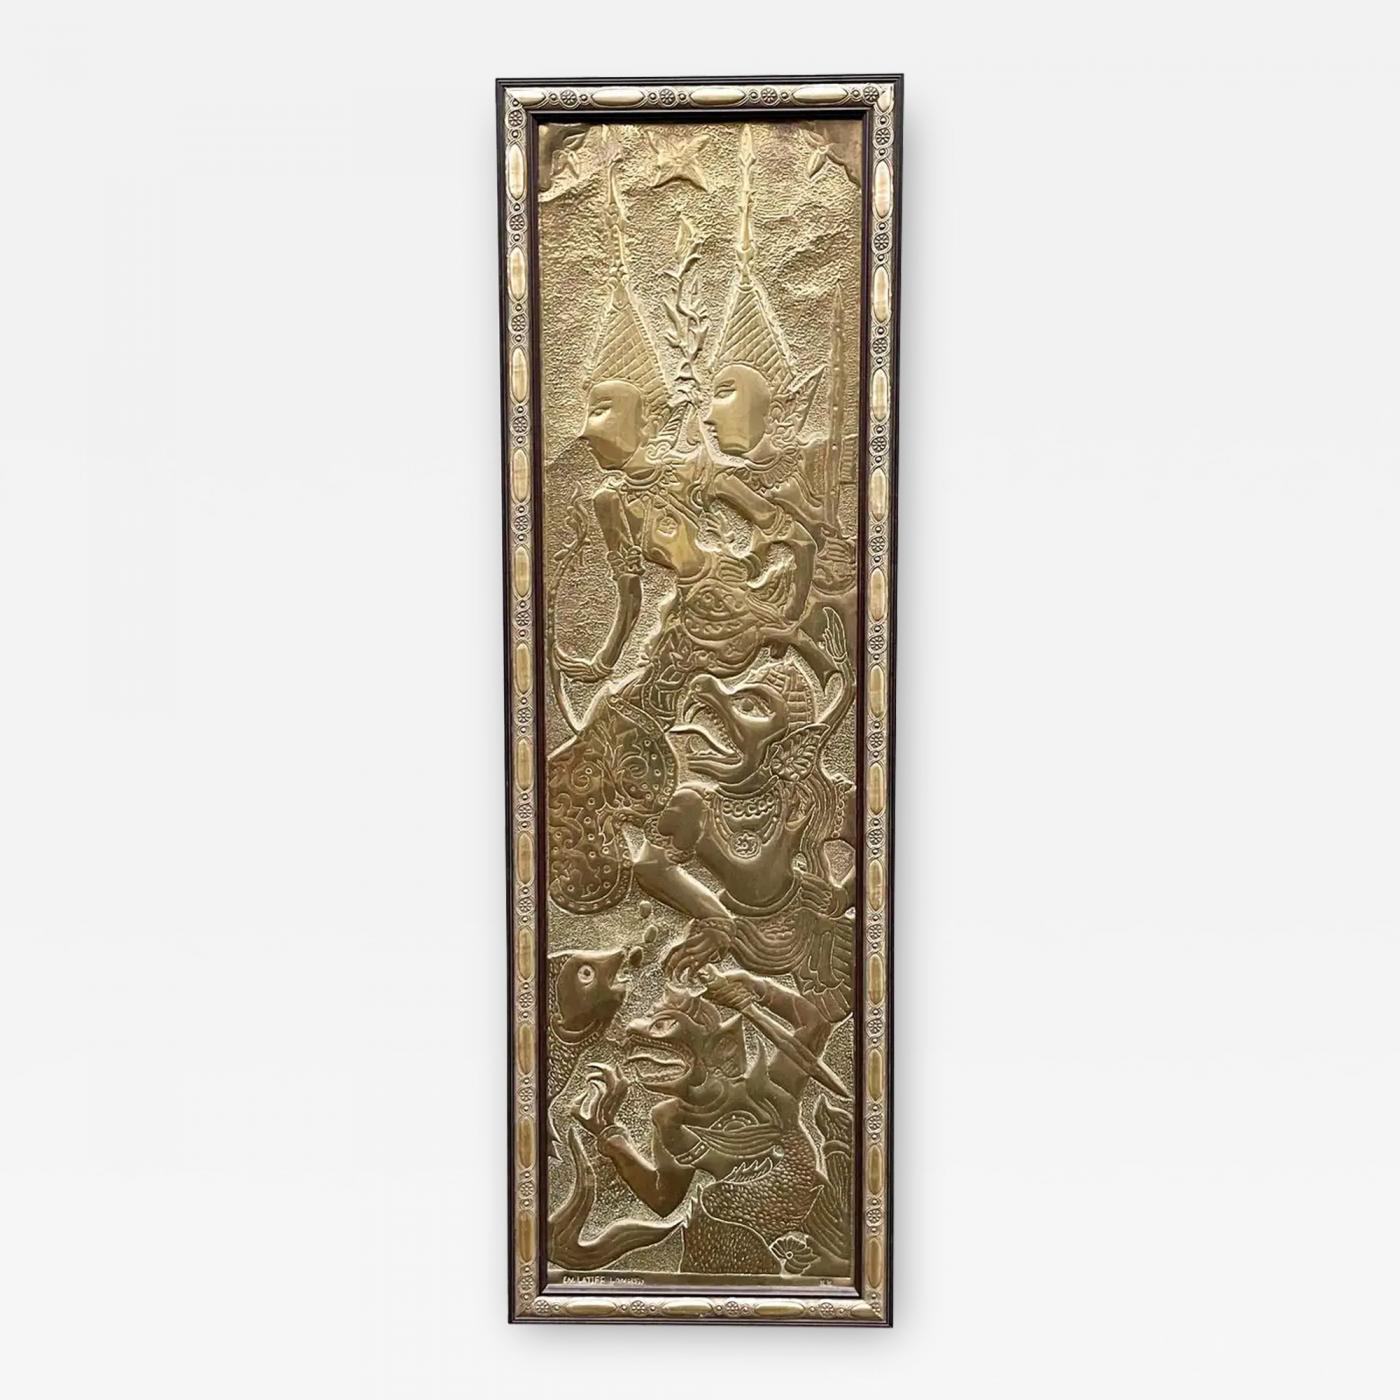 https://cdn.incollect.com/sites/default/files/zoom/Philip-and-Kelvin-LaVerne-Signed-Mid-Century-Asian-Modern-Brass-Sculpture-Wall-Plaque-After-Kelvin-Laverne-551043-2549472.jpg